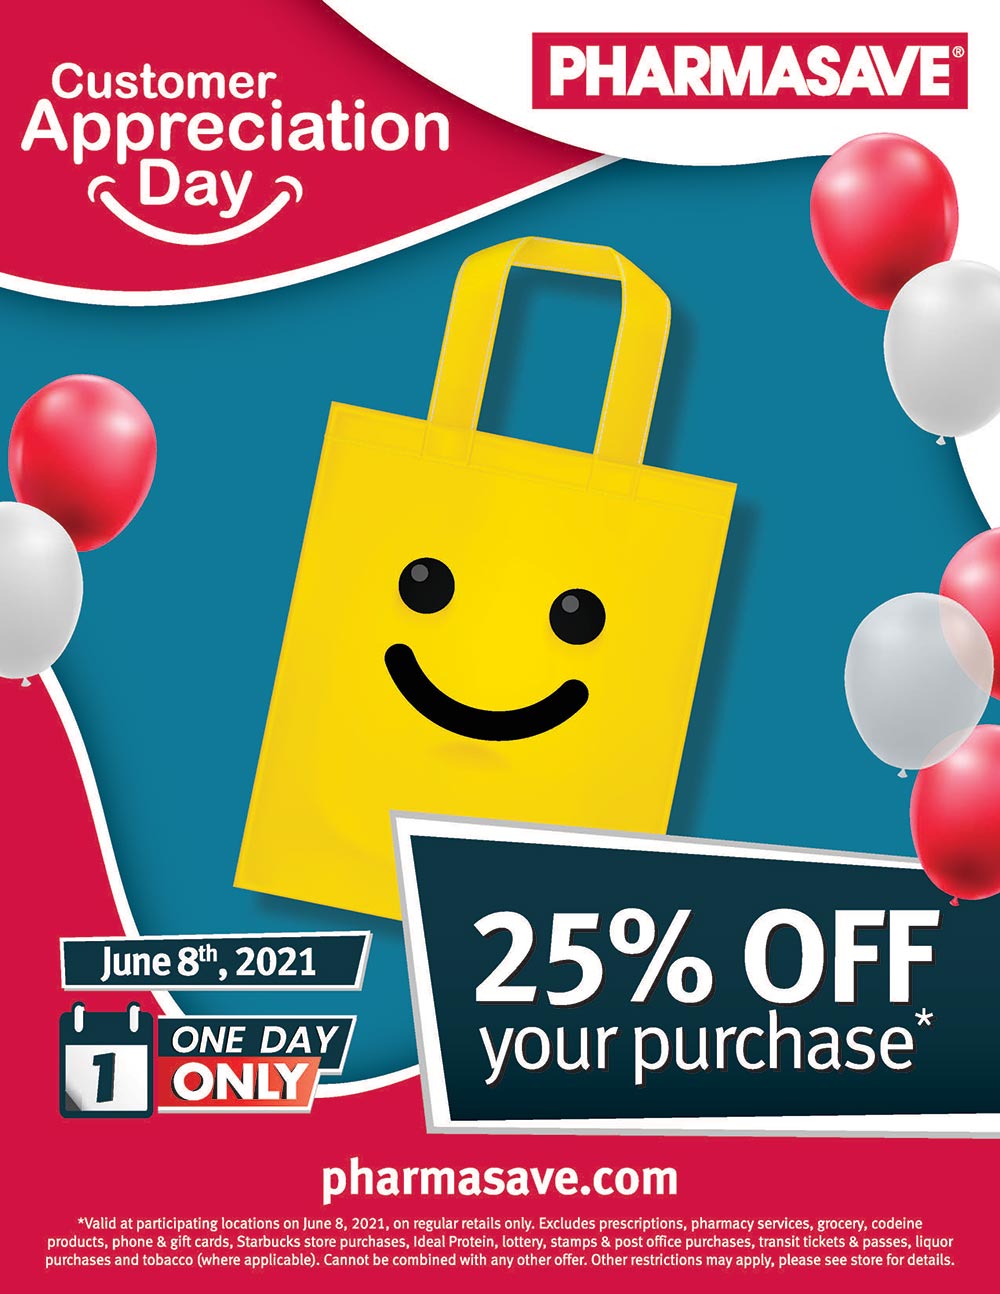 customer appreciation day is June 8, 2021 get 25% off almost all regular priced products